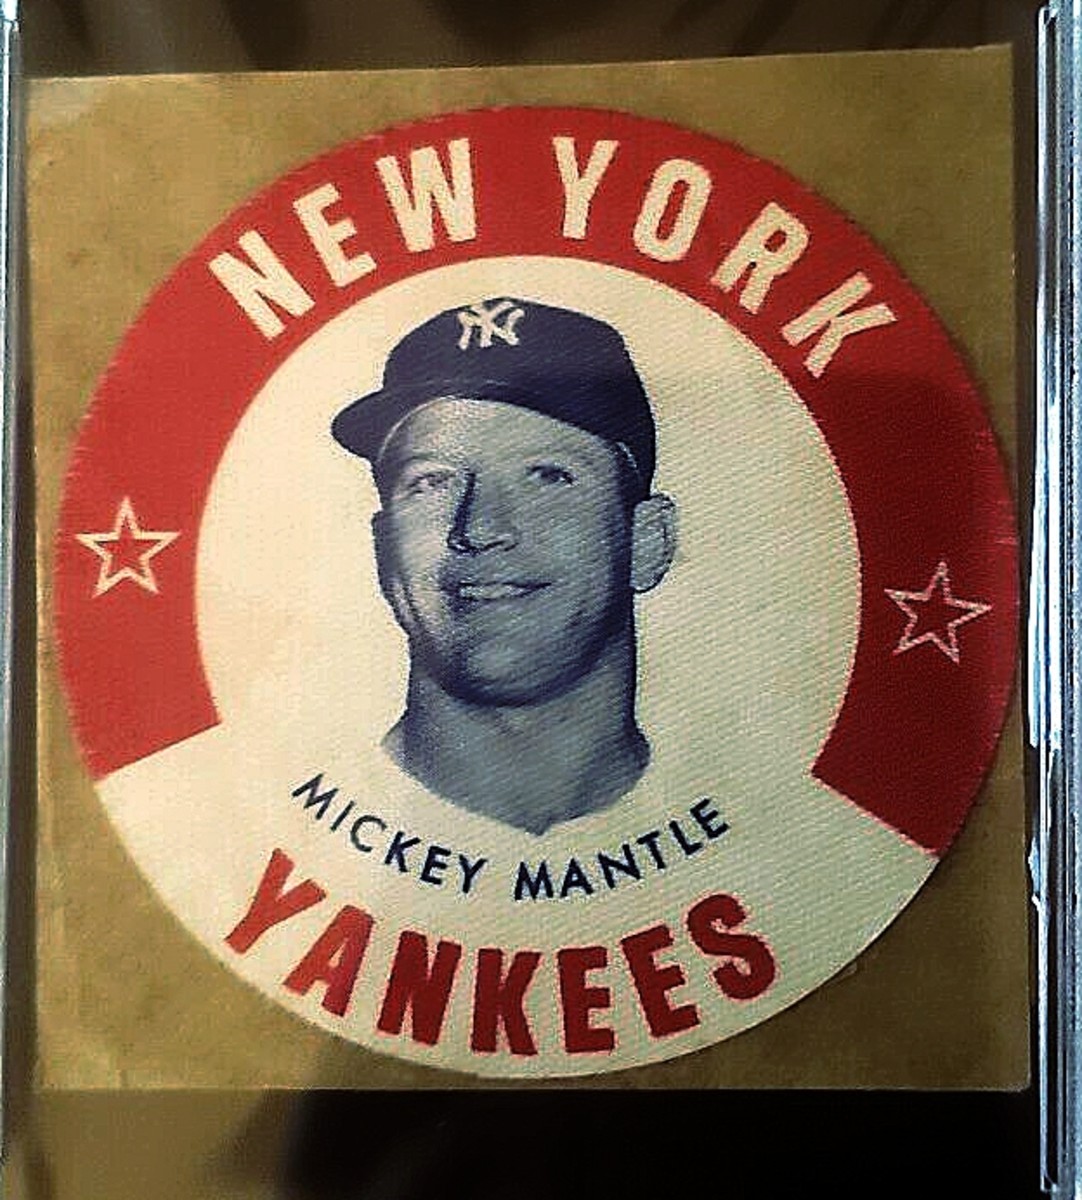 1964 Mickey Mantle sports heroes card.